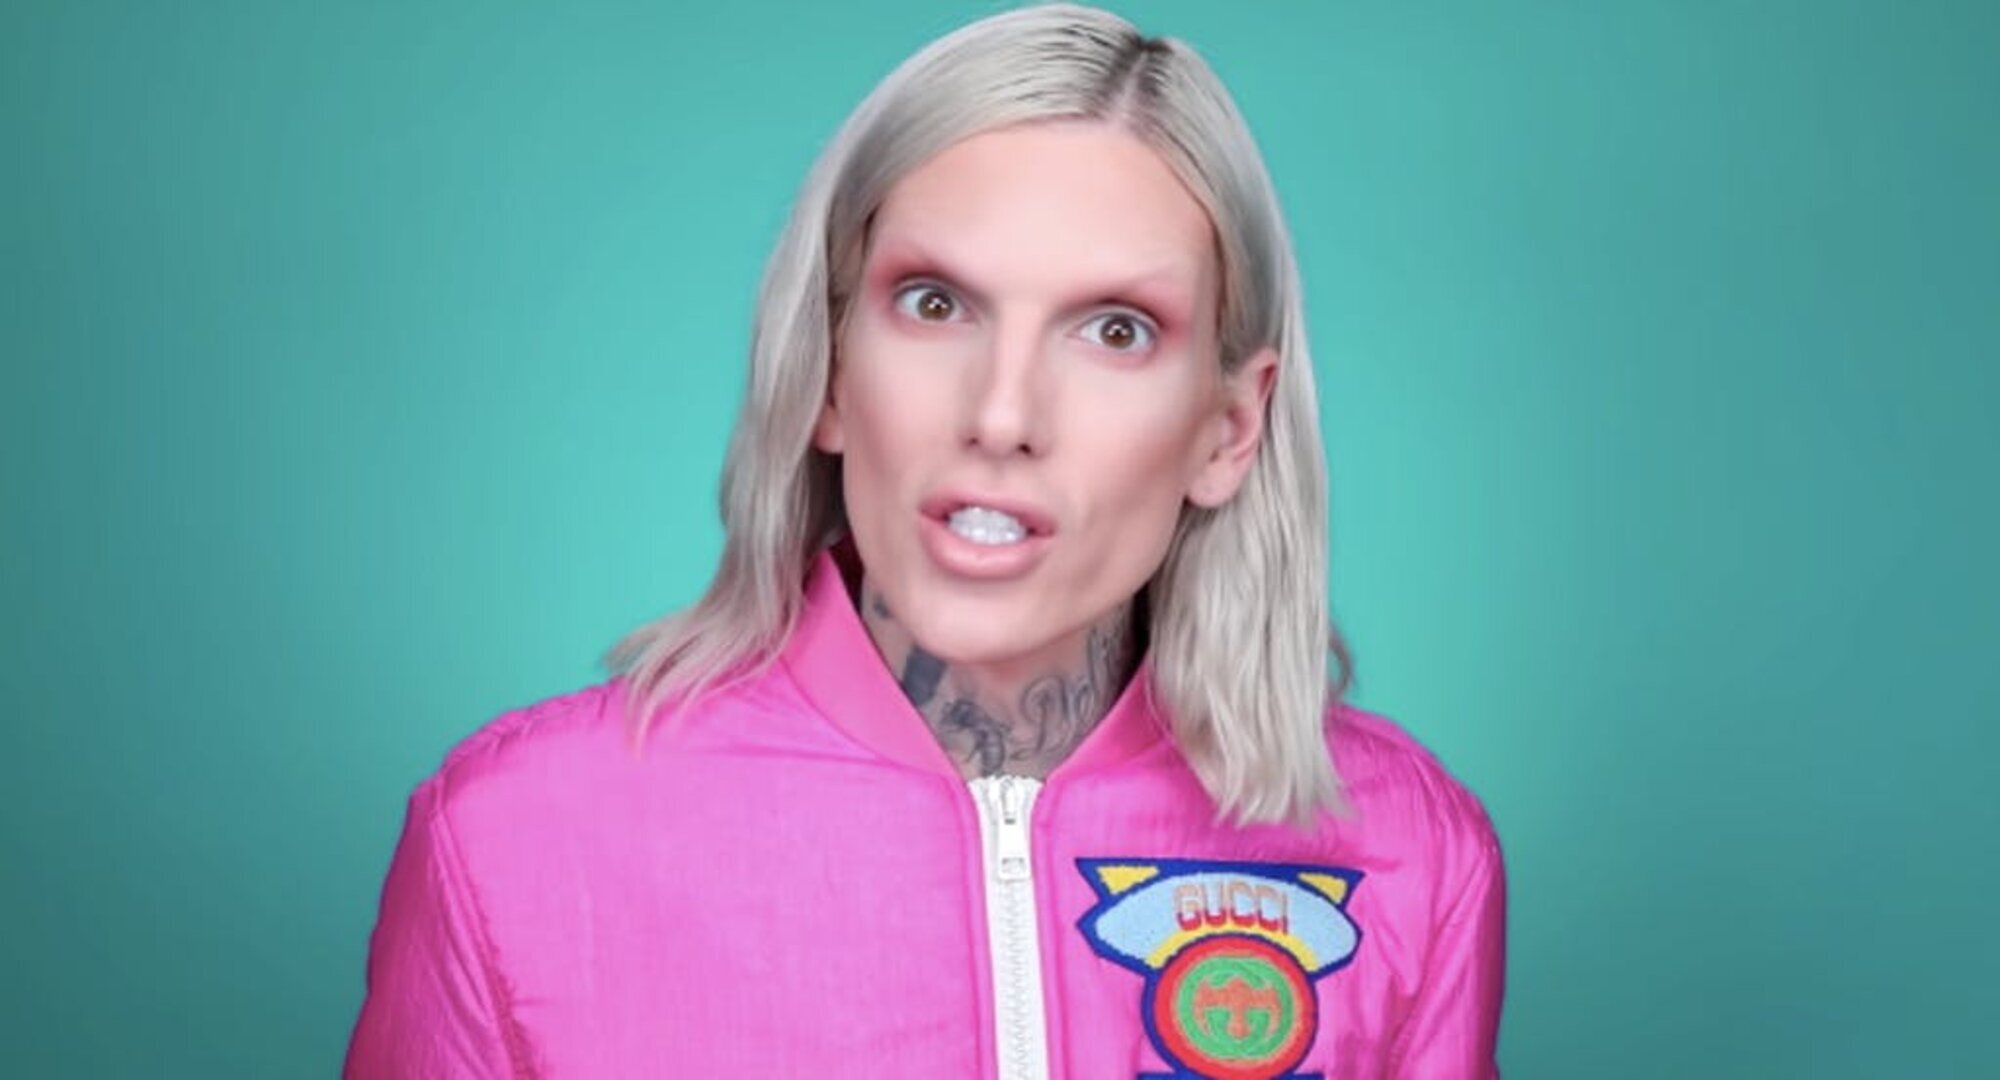 Is Jeffree Star an abuser? Inside the bombshell Twitter accusations